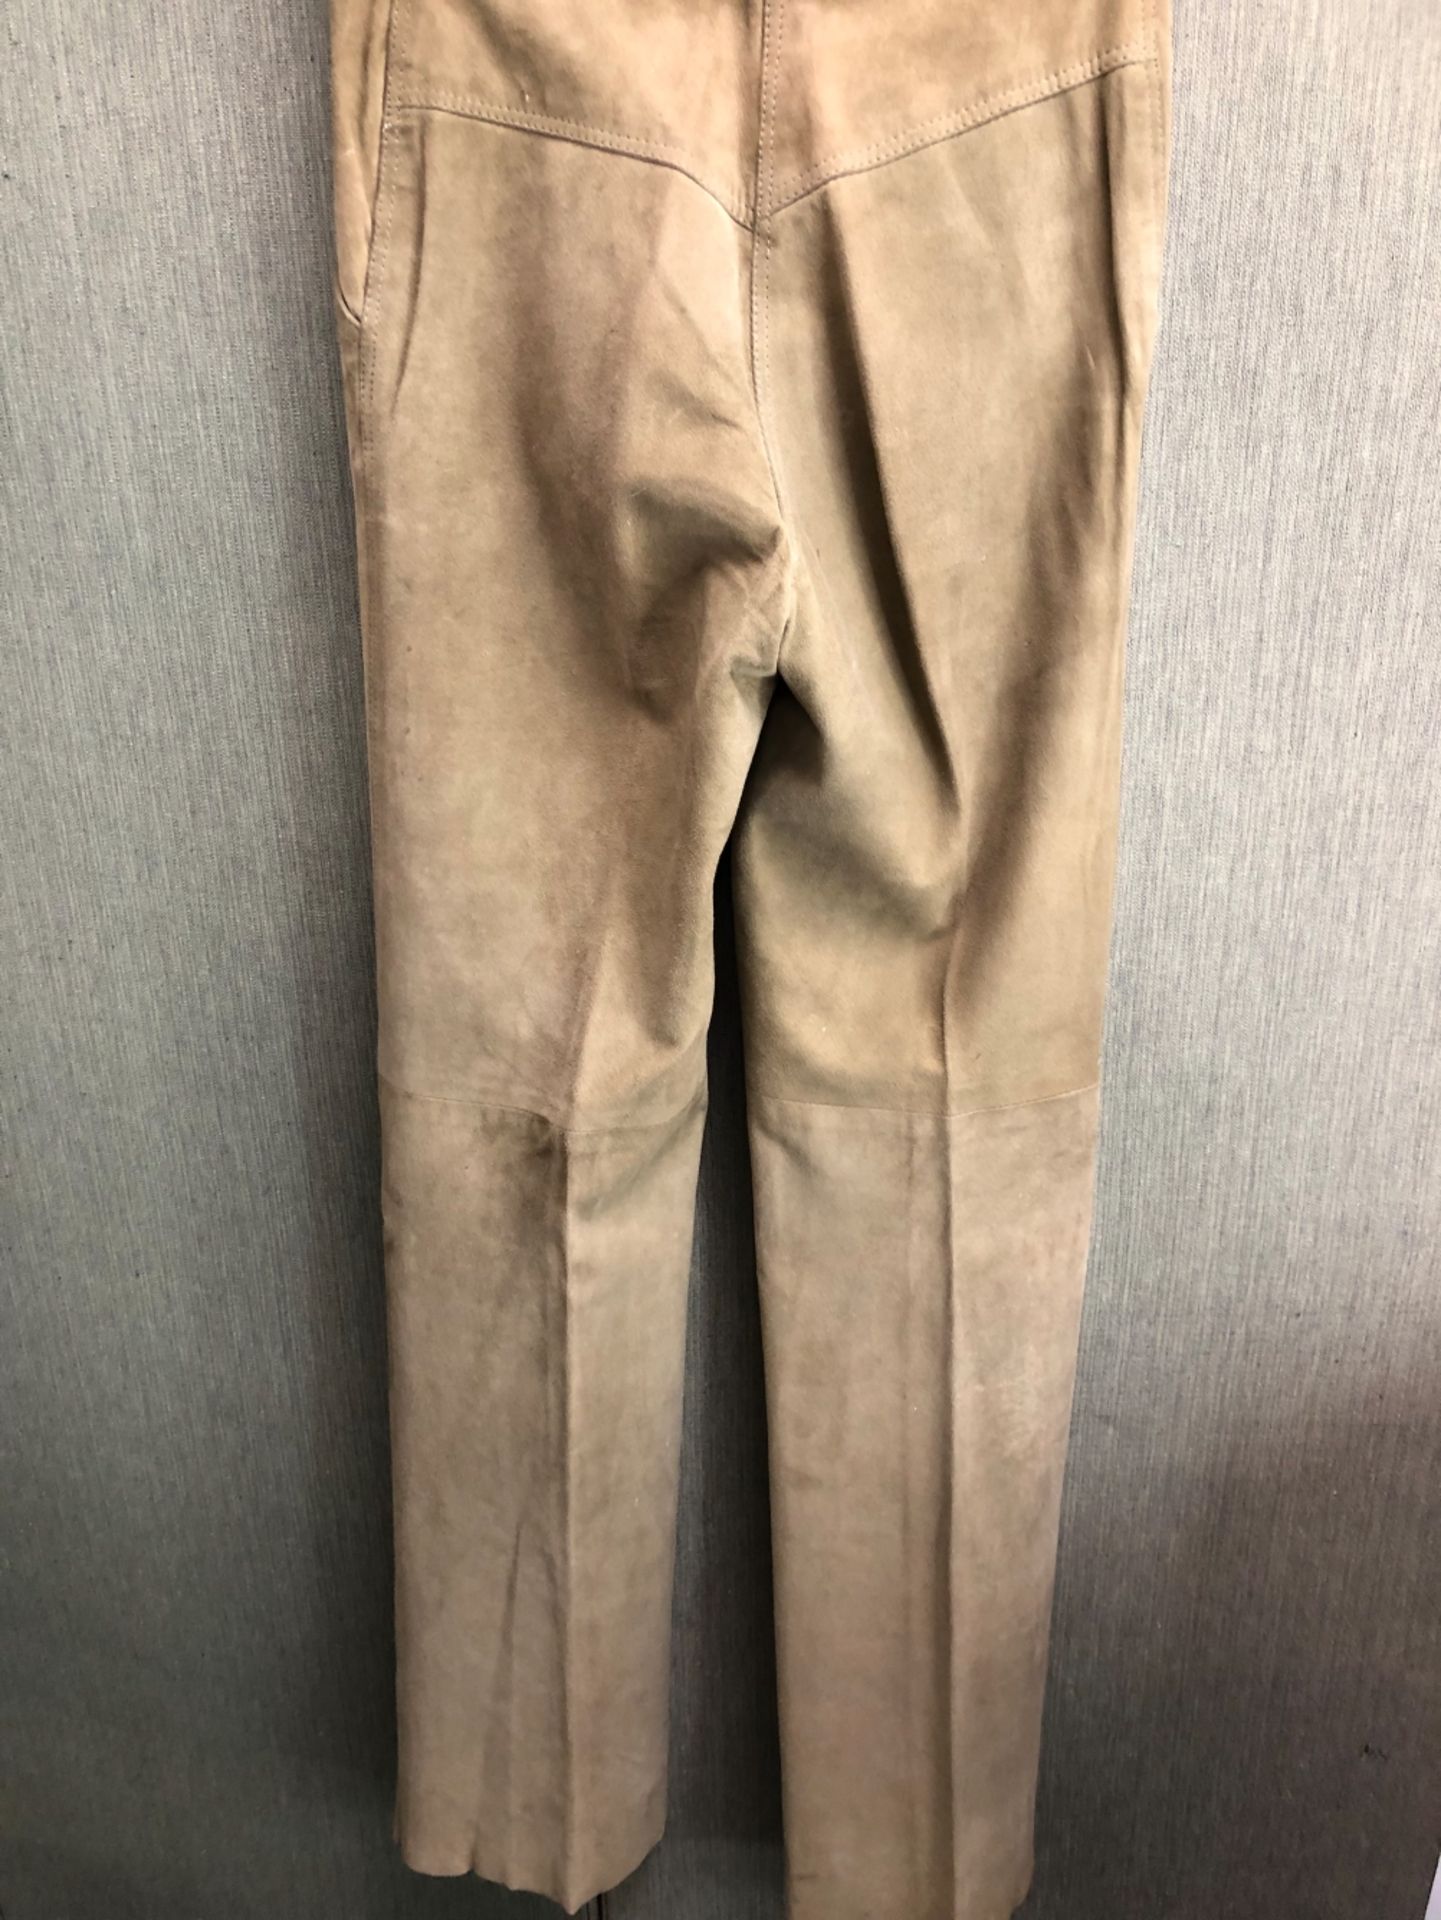 TWO PAIRS OF PATTI SEARLE PALE GREEN FLARED SUEDE TROUSERS ONE 38 INCH HE OTHER 34 INCH, TOGETHER - Image 17 of 26